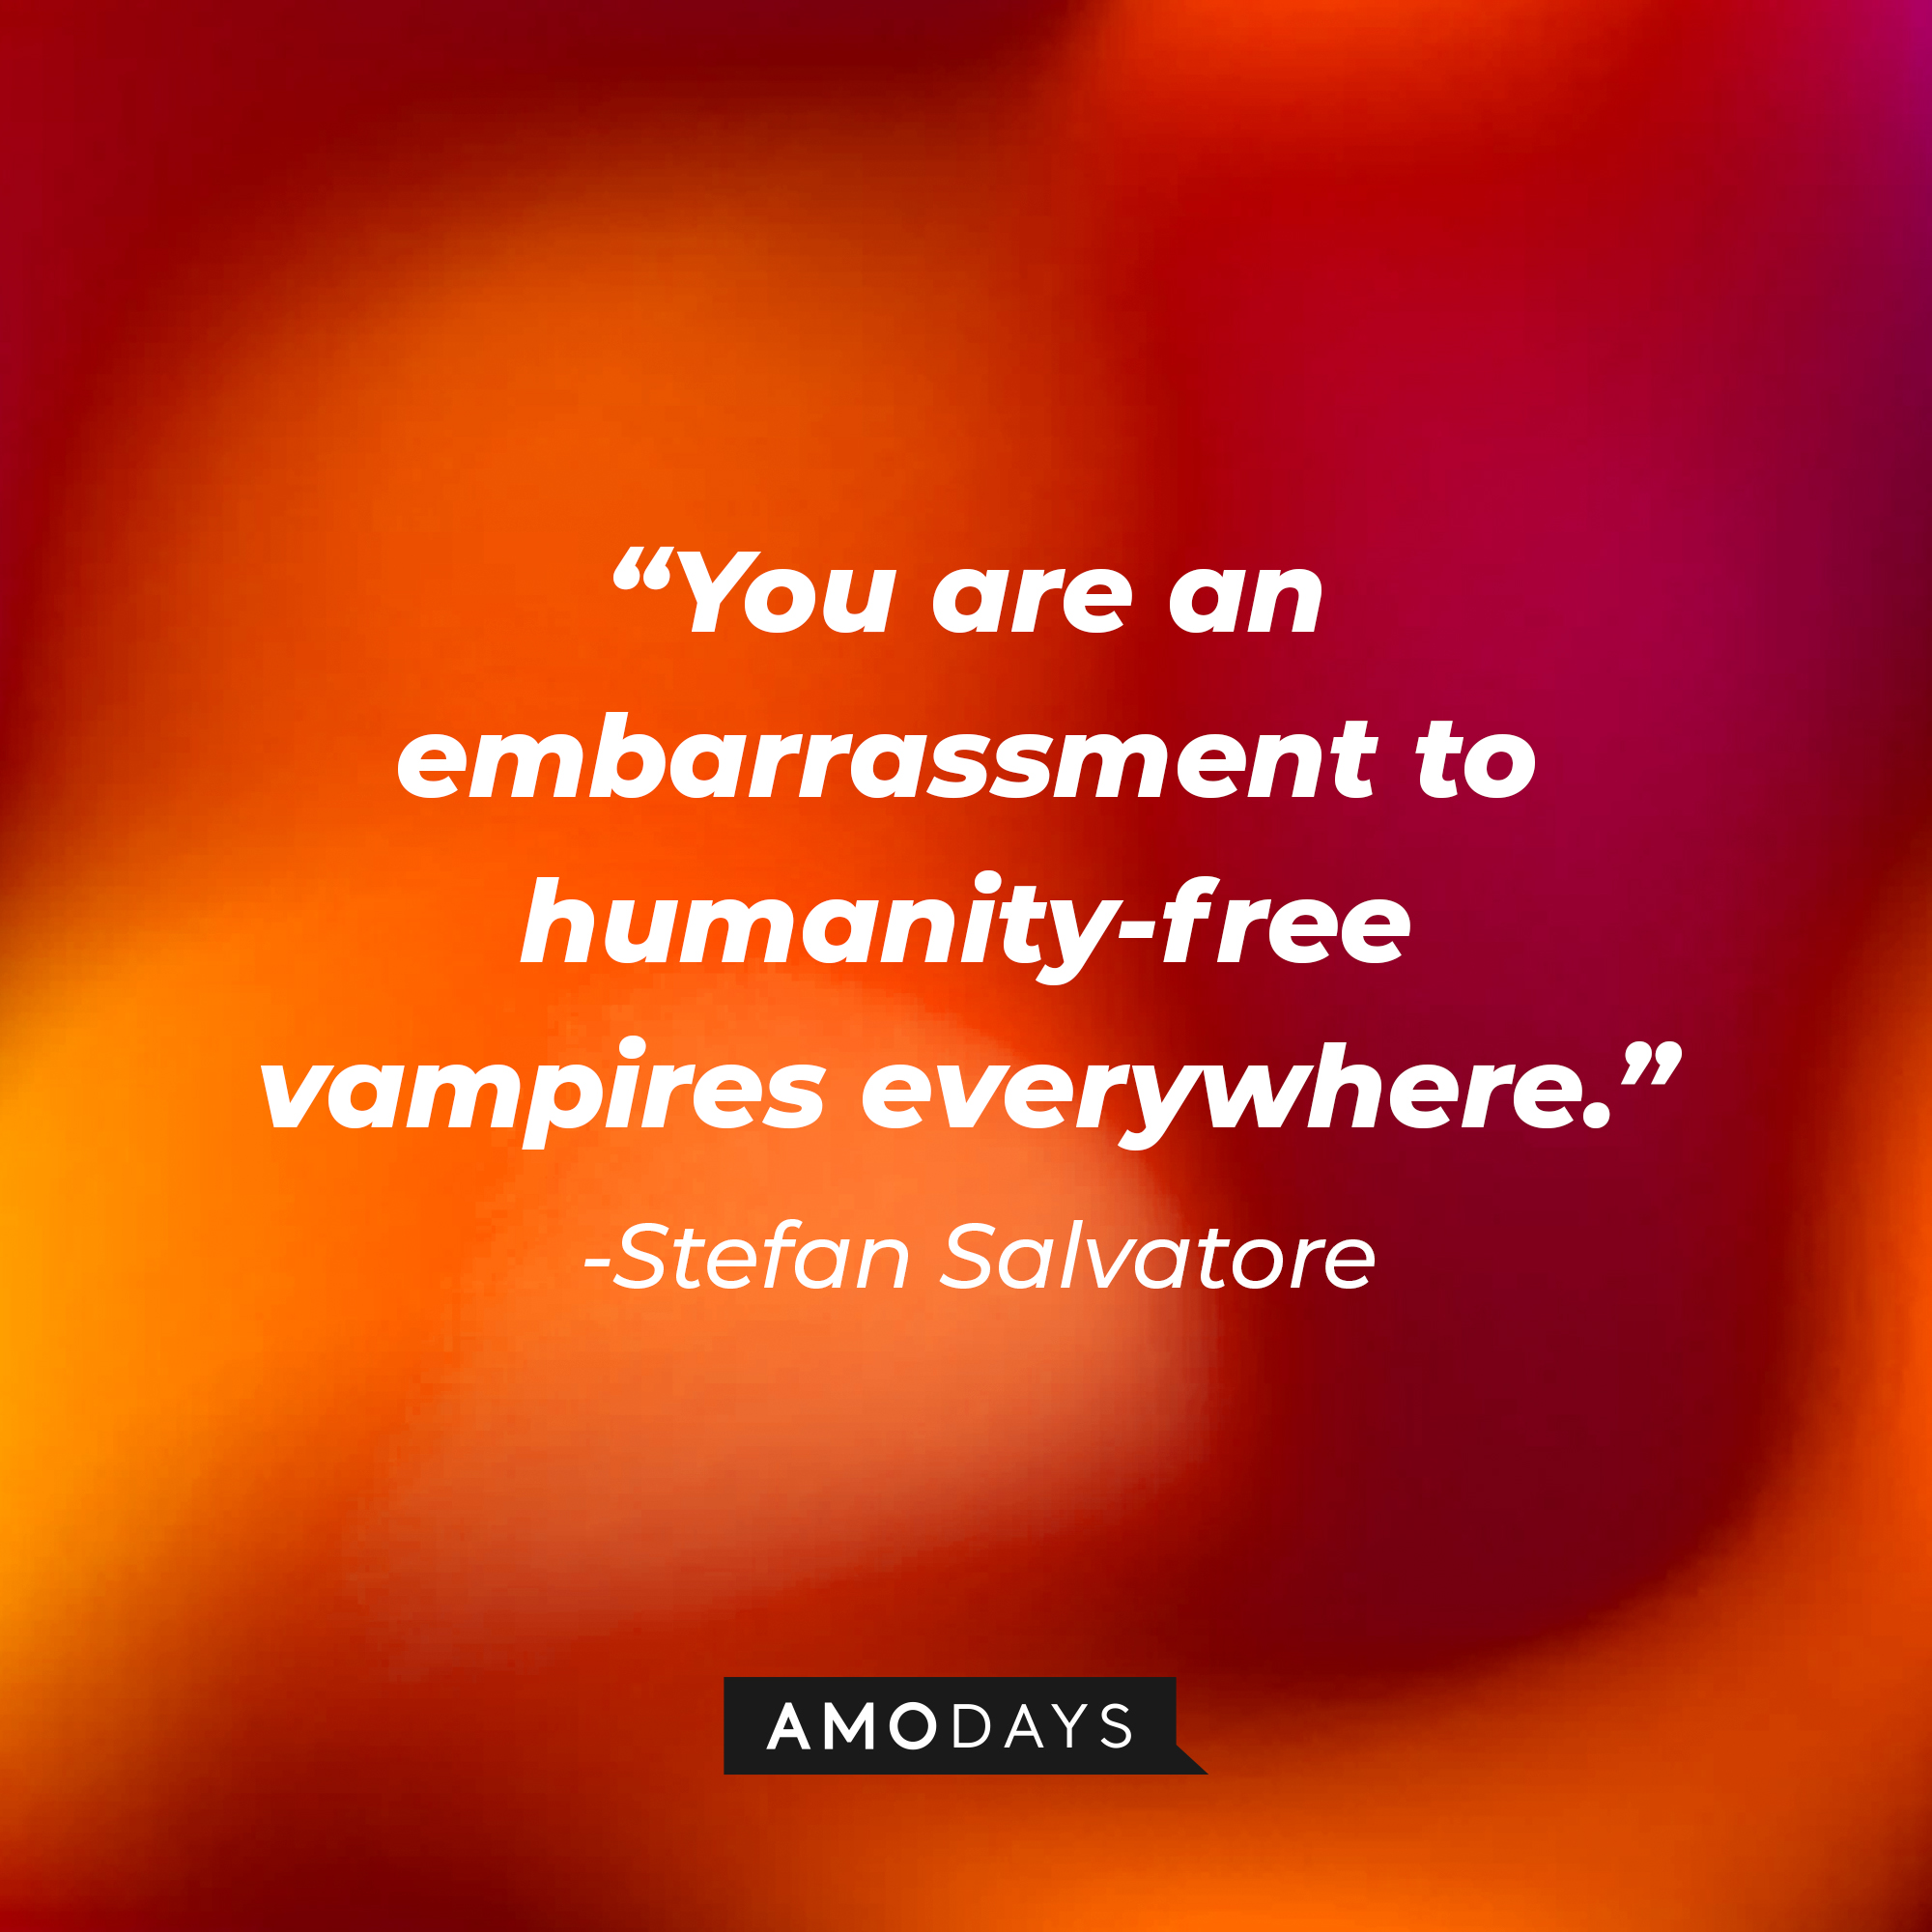 Stefan Salvatore's quote: "You are an embarrassment to humanity-free vampires everywhere." | Source: AmoDays